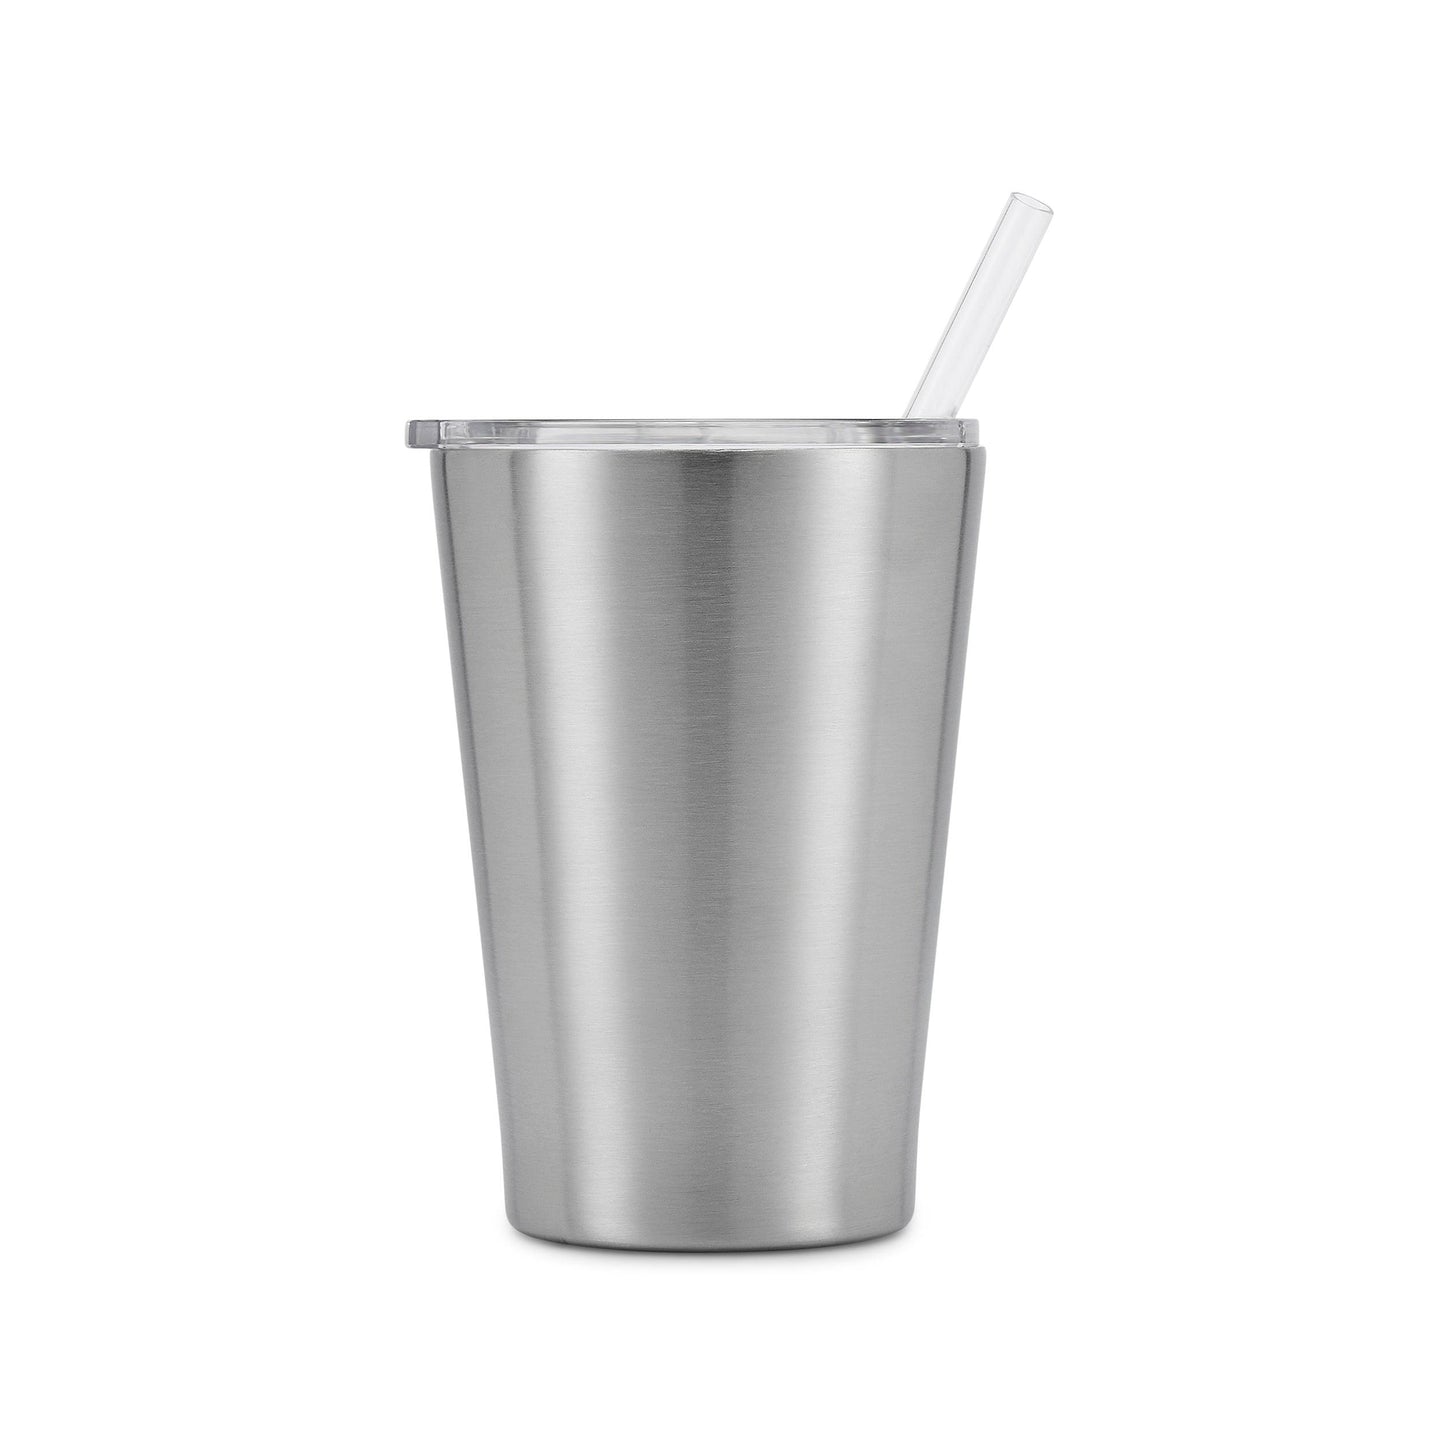 Kids and Toddler Stainless Steel Tumbler Cups with Lid and Straw